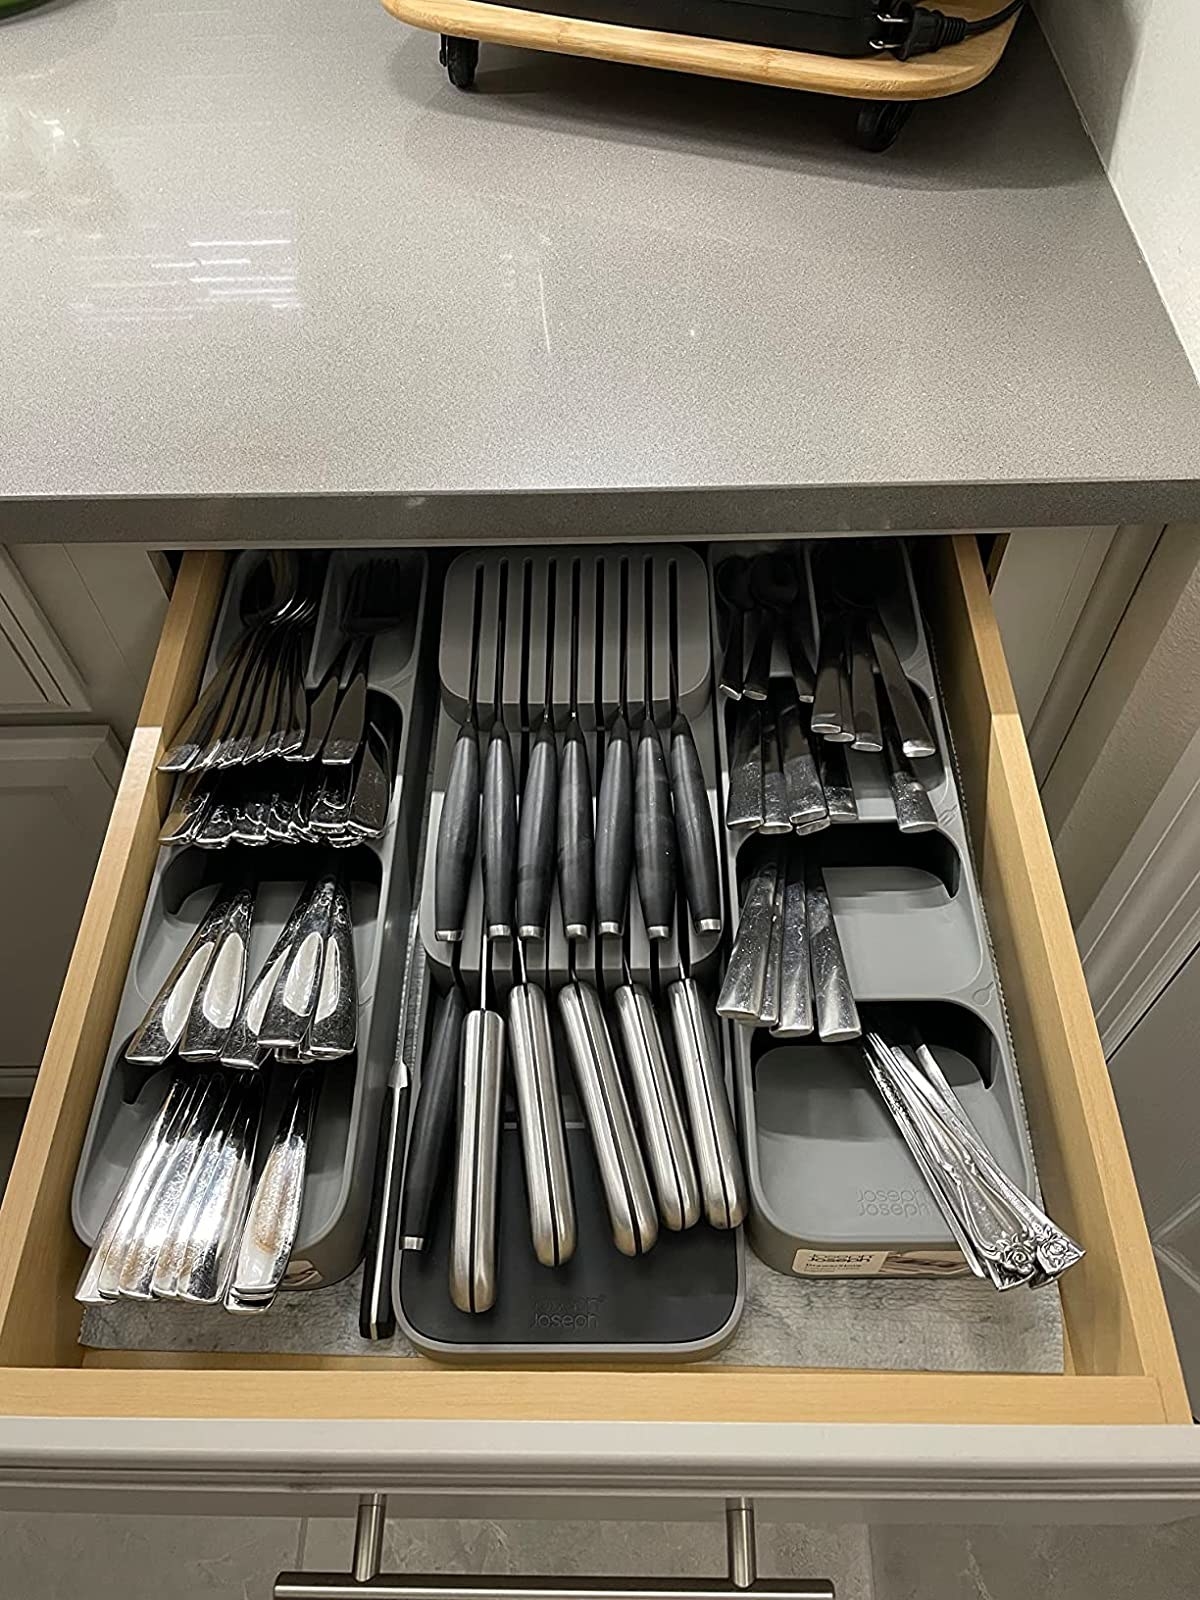 Reviewer image of cutlery organizer